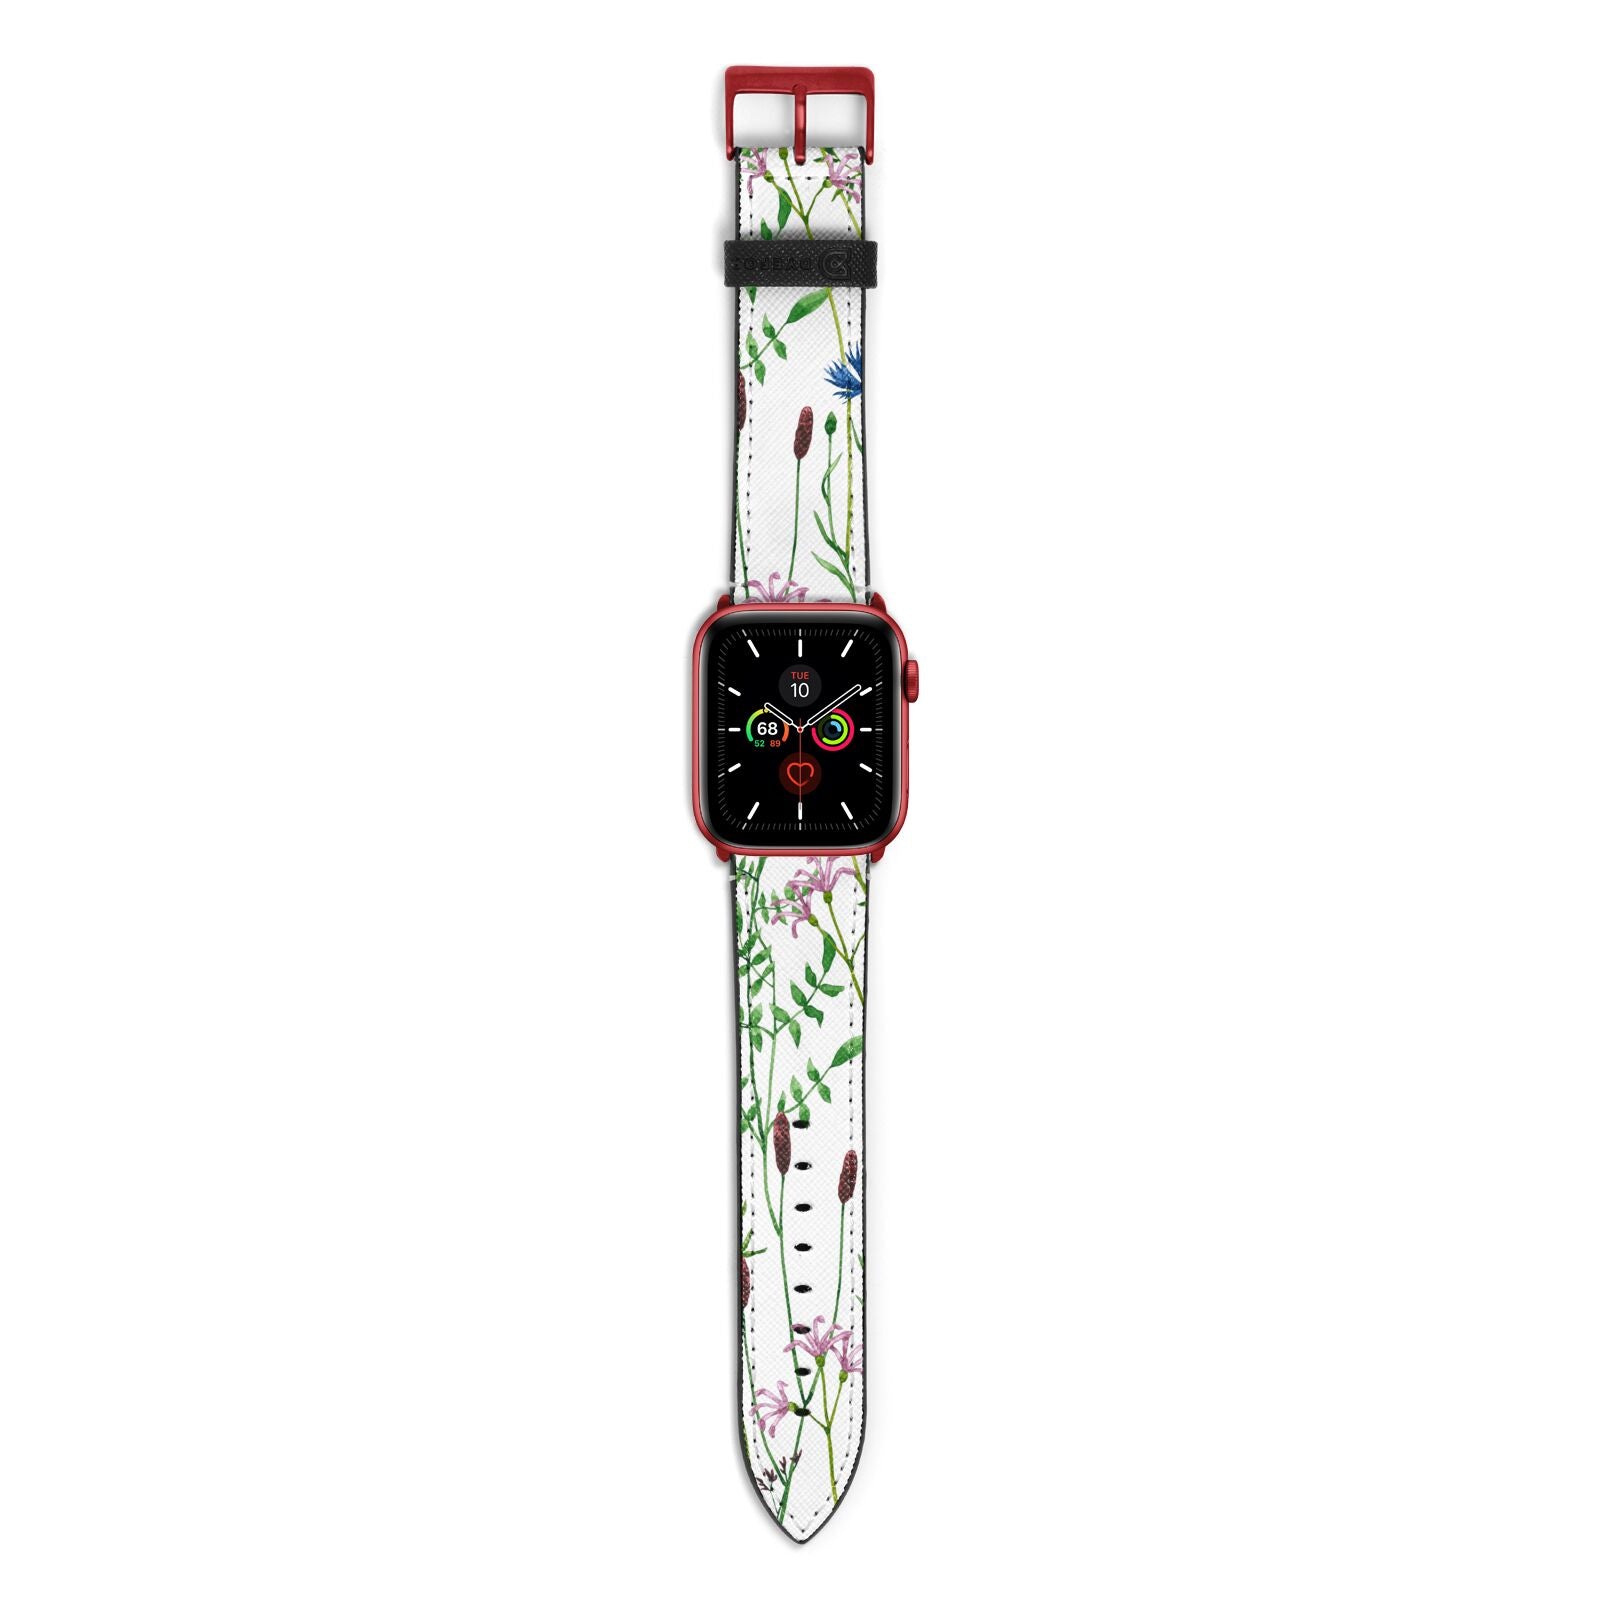 Wildflowers Apple Watch Strap with Red Hardware